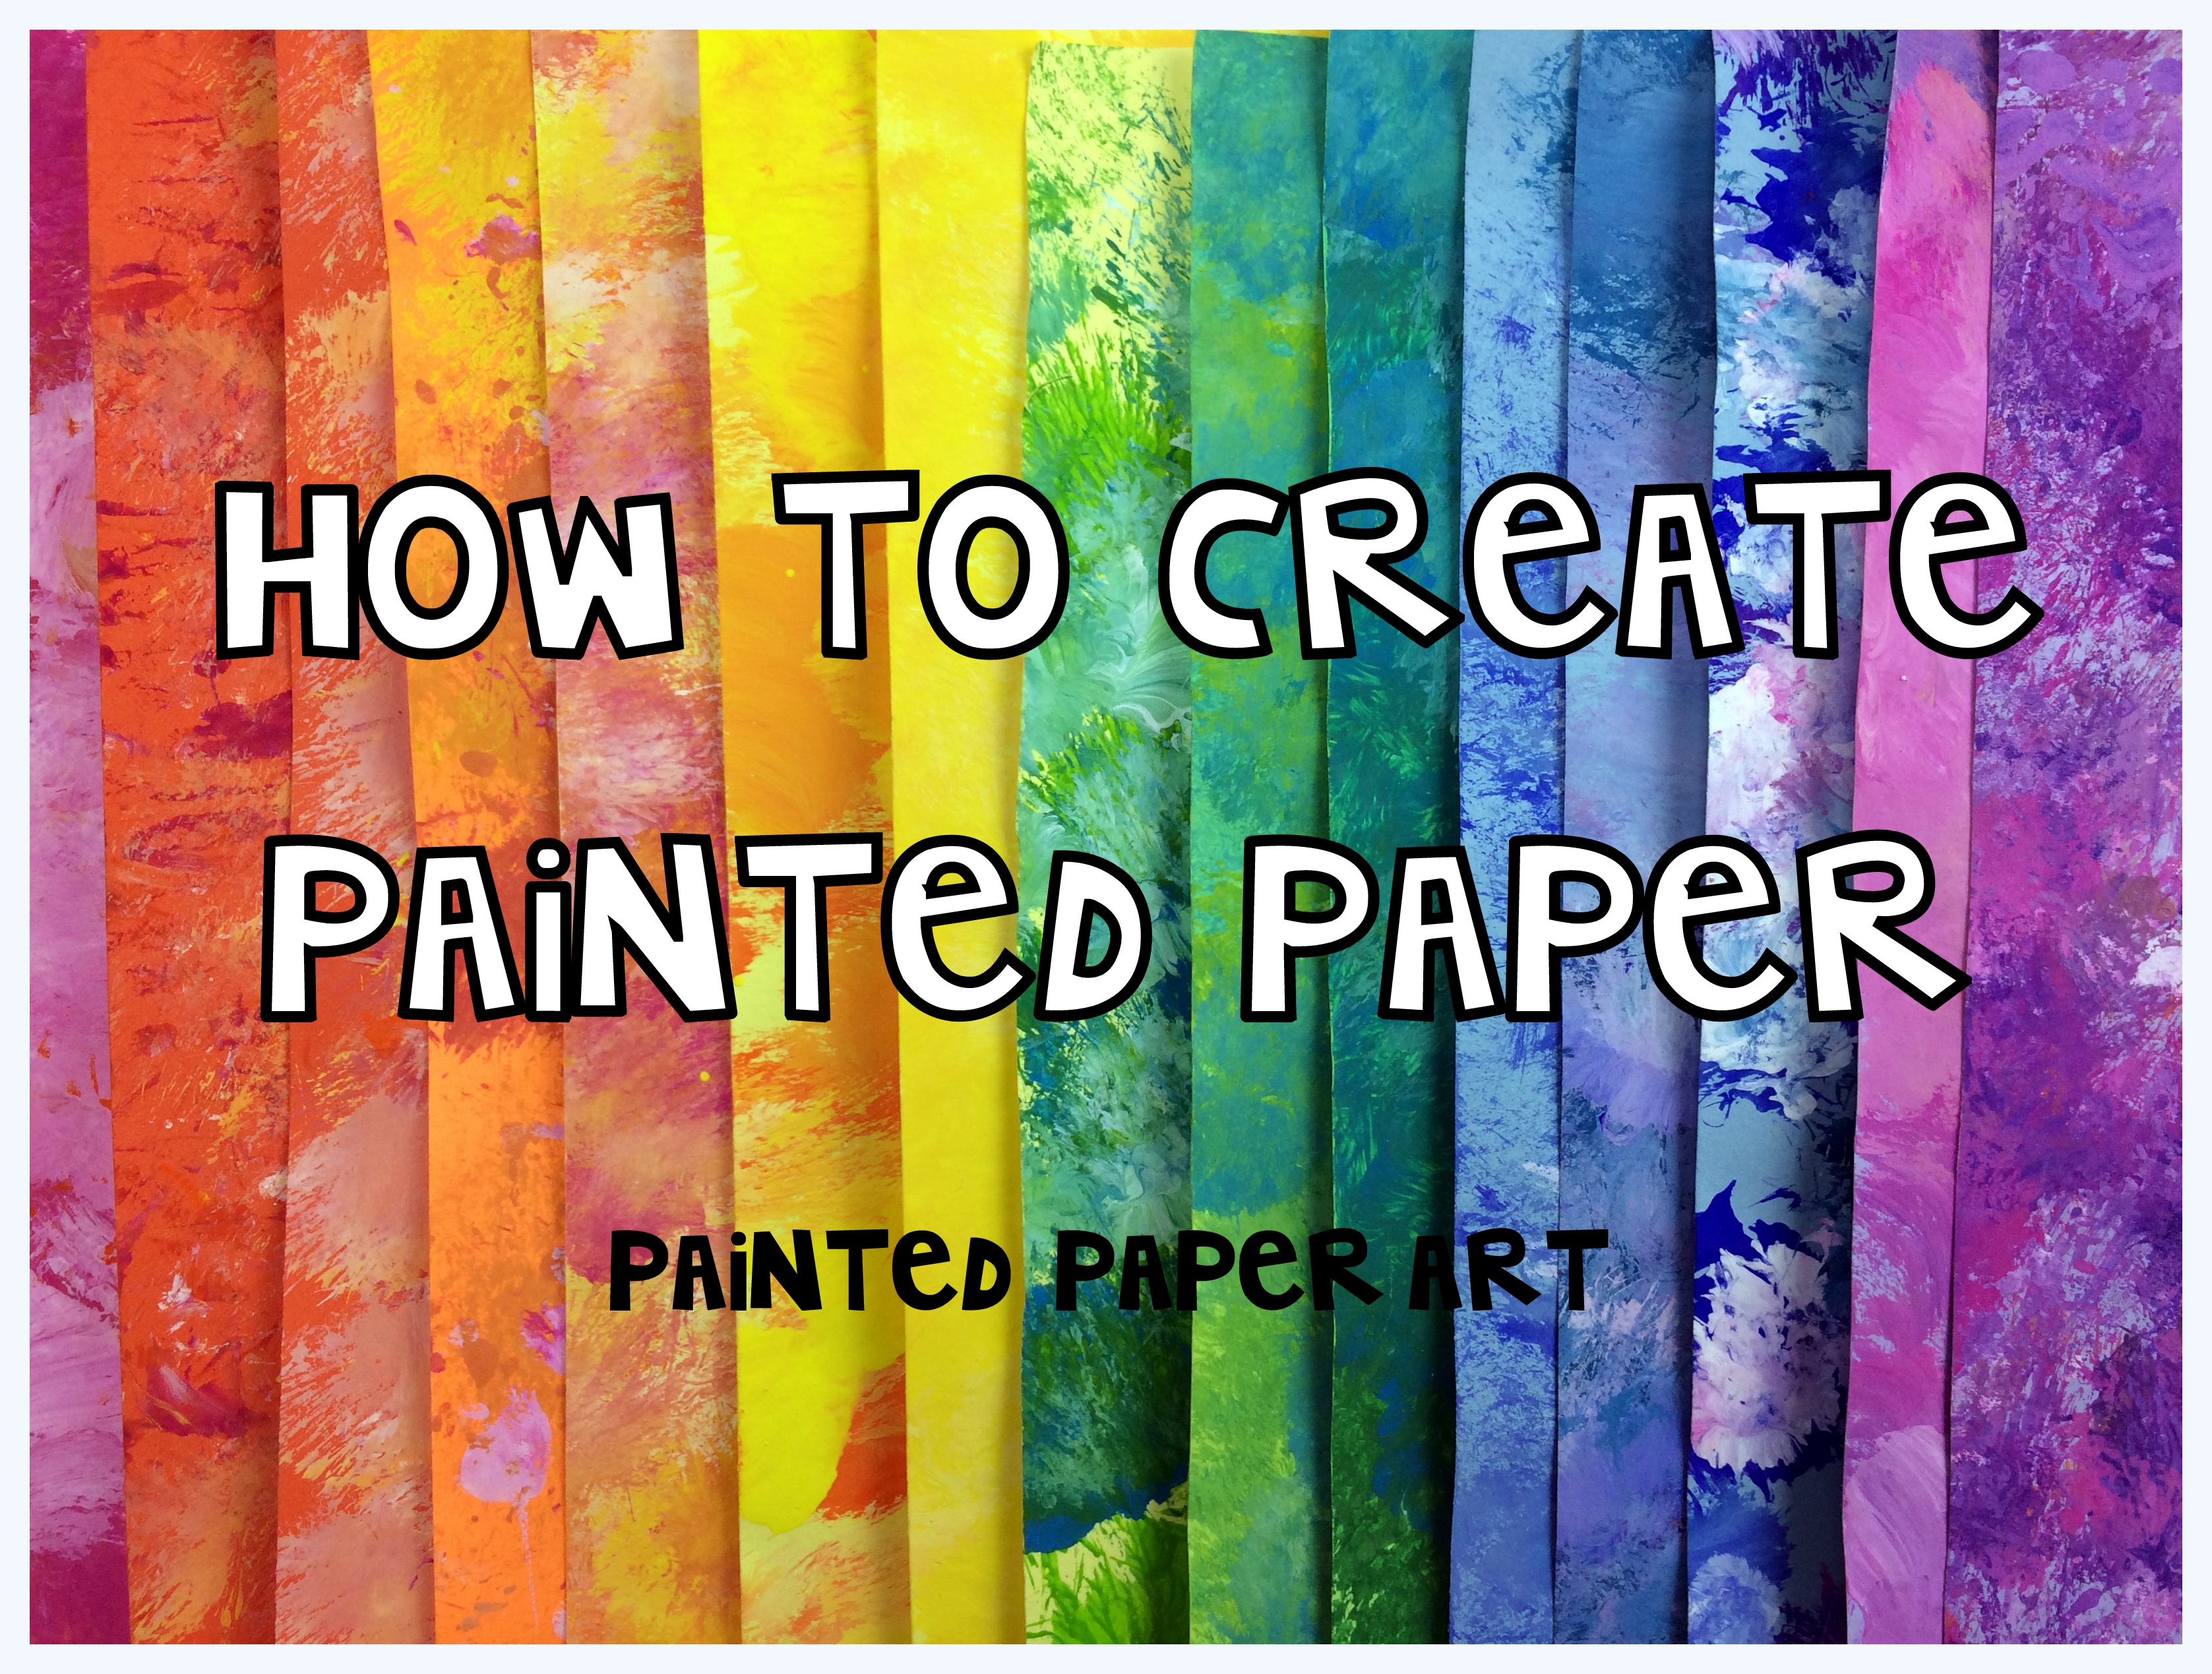 The Painted Paper Project™ — PopUpArtClasses